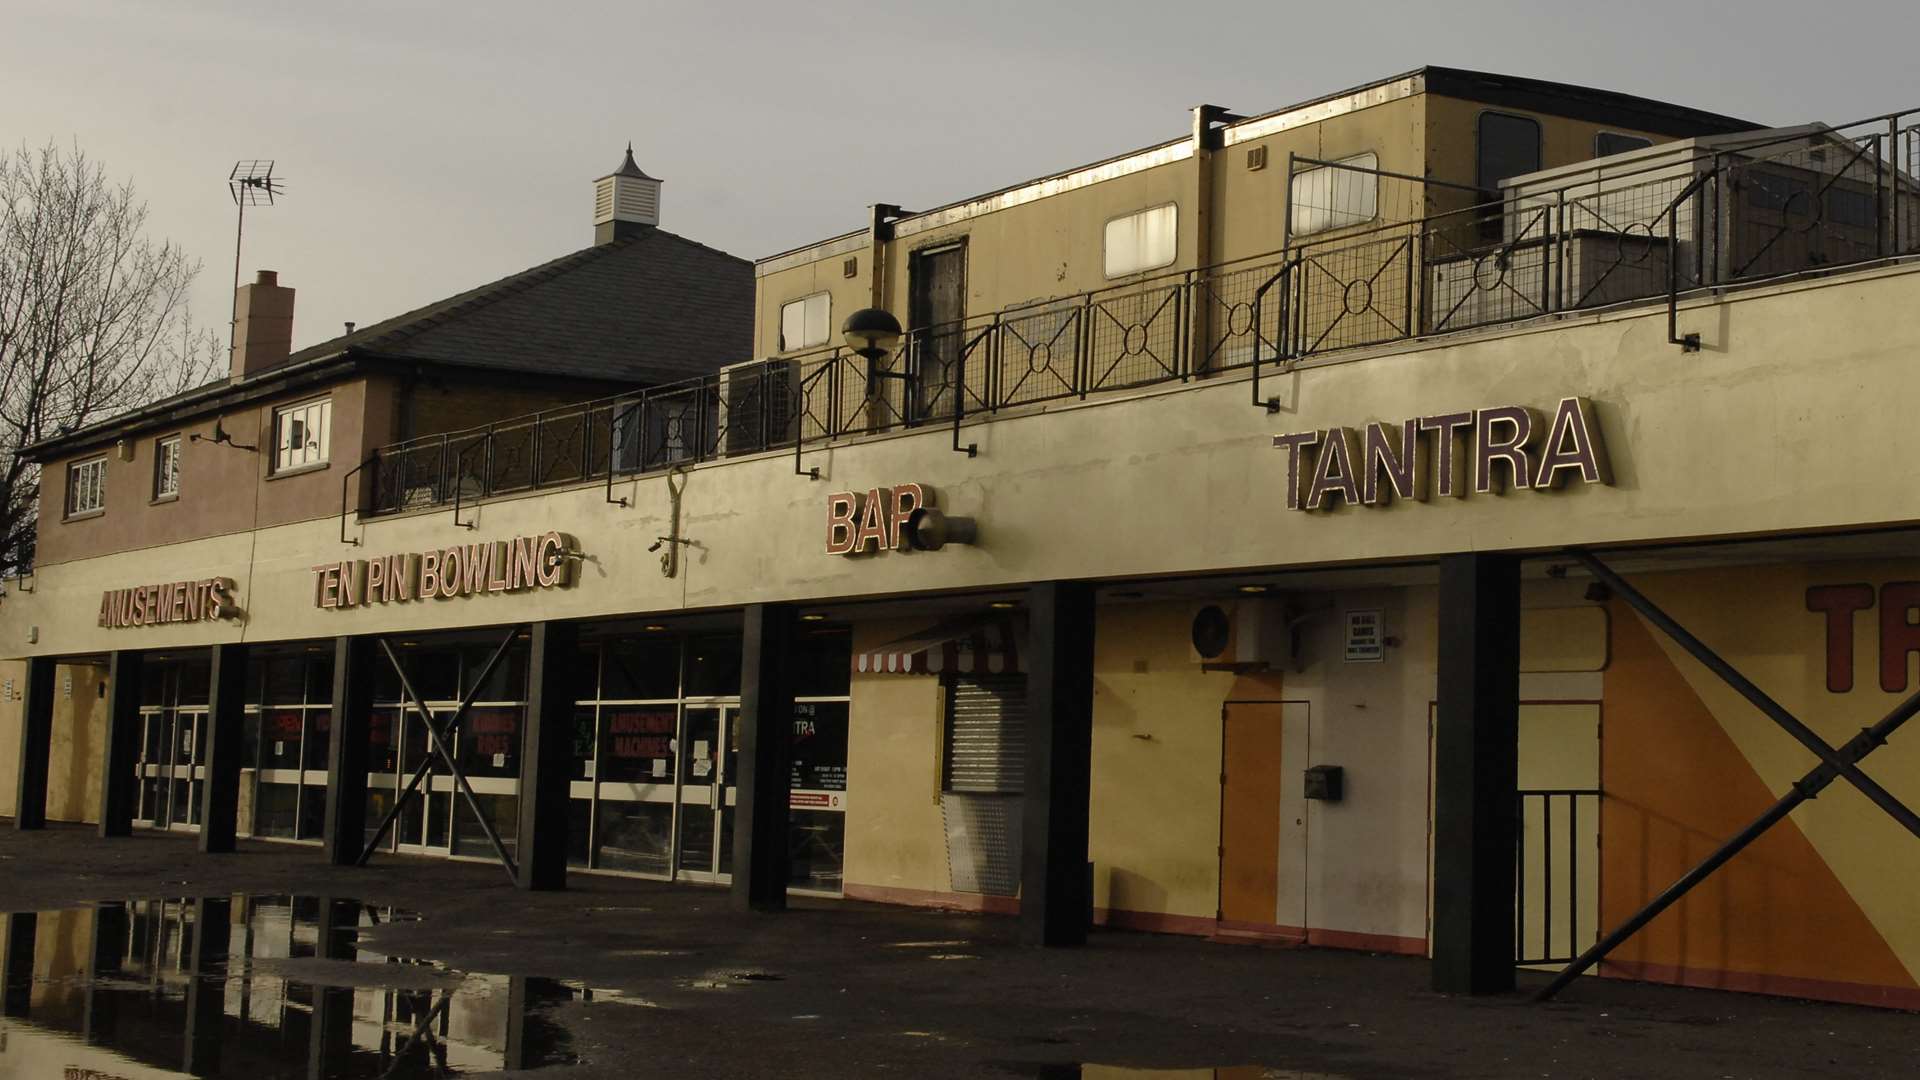 Banter allegedly turned to violence at Tantra nightclub in Sheerness